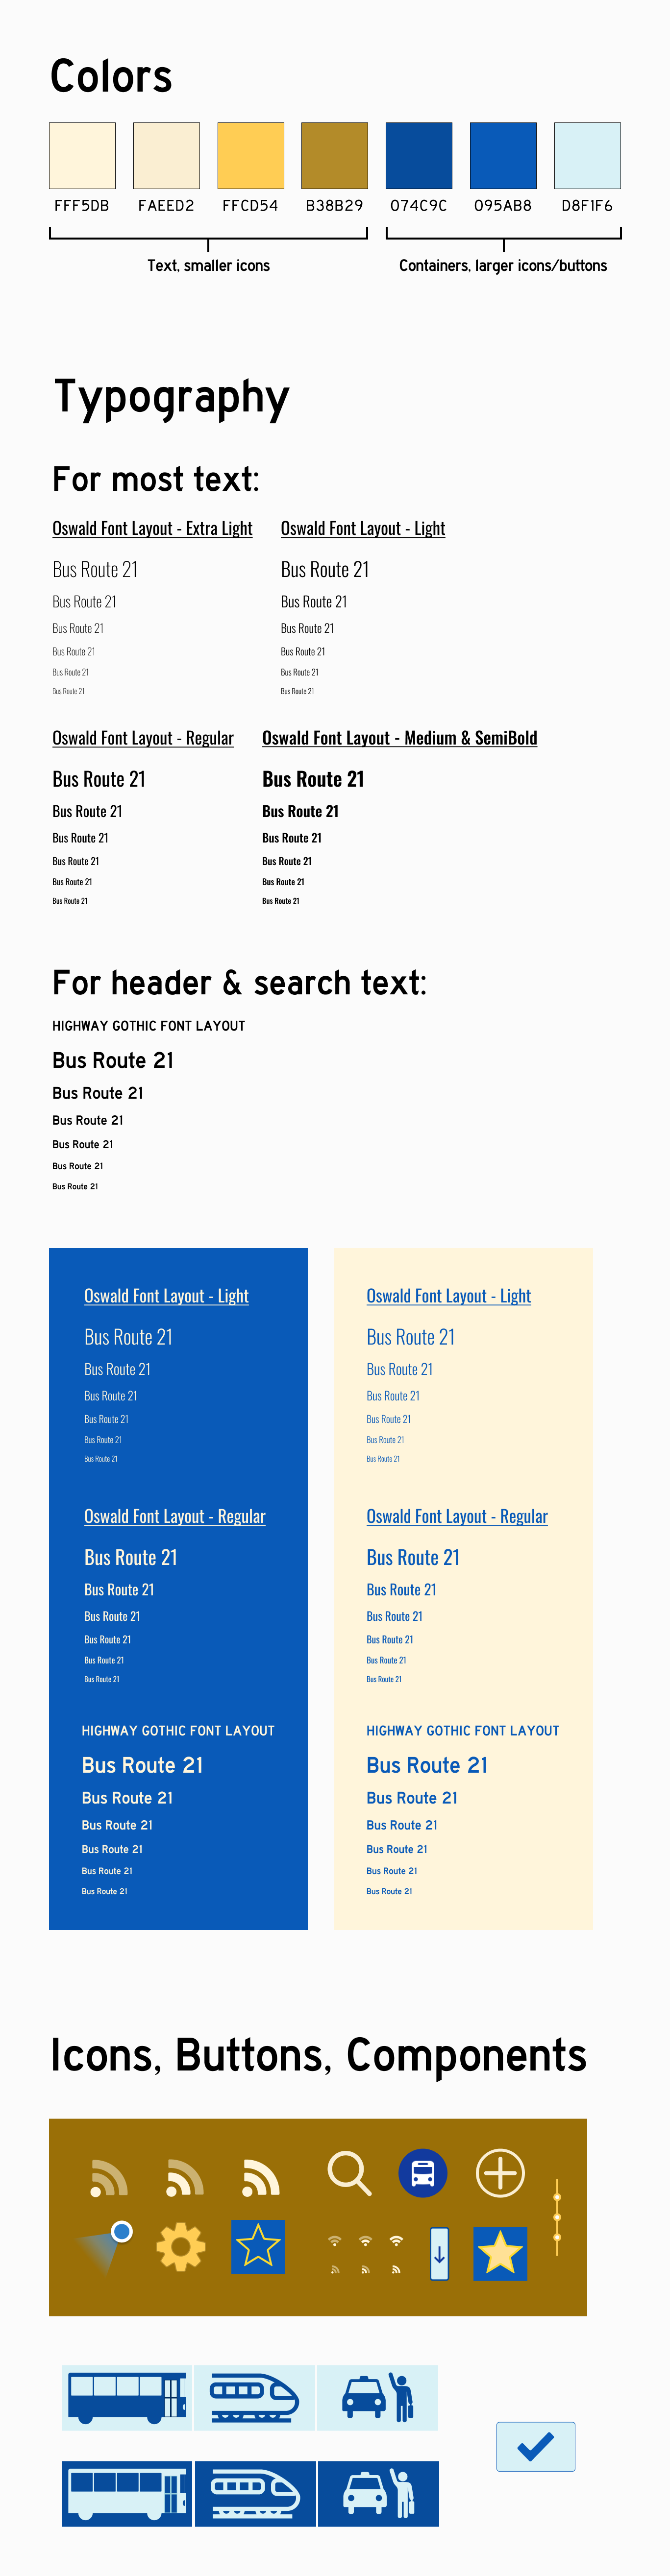 BusyBus style guide, consisting of colors, typography, and iconography